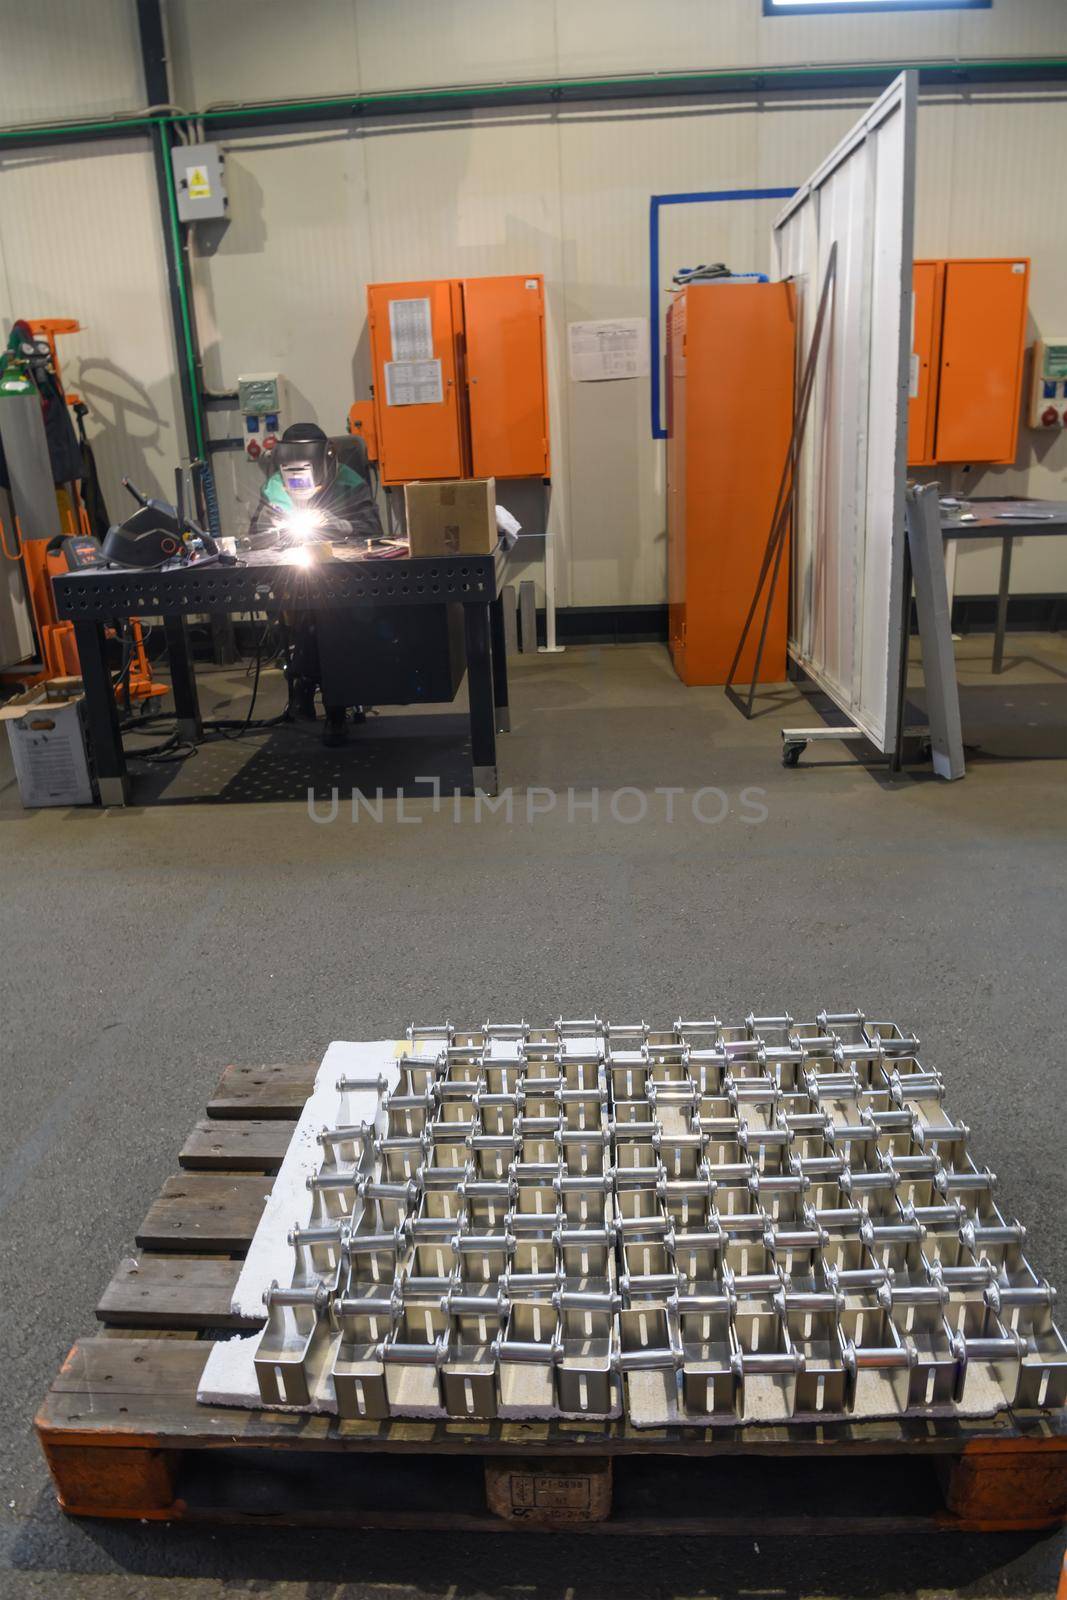 The first phase of metal and aluminum processing. Processed products from CNC machines stacked on a pallet in a large modern factory. High quality photo